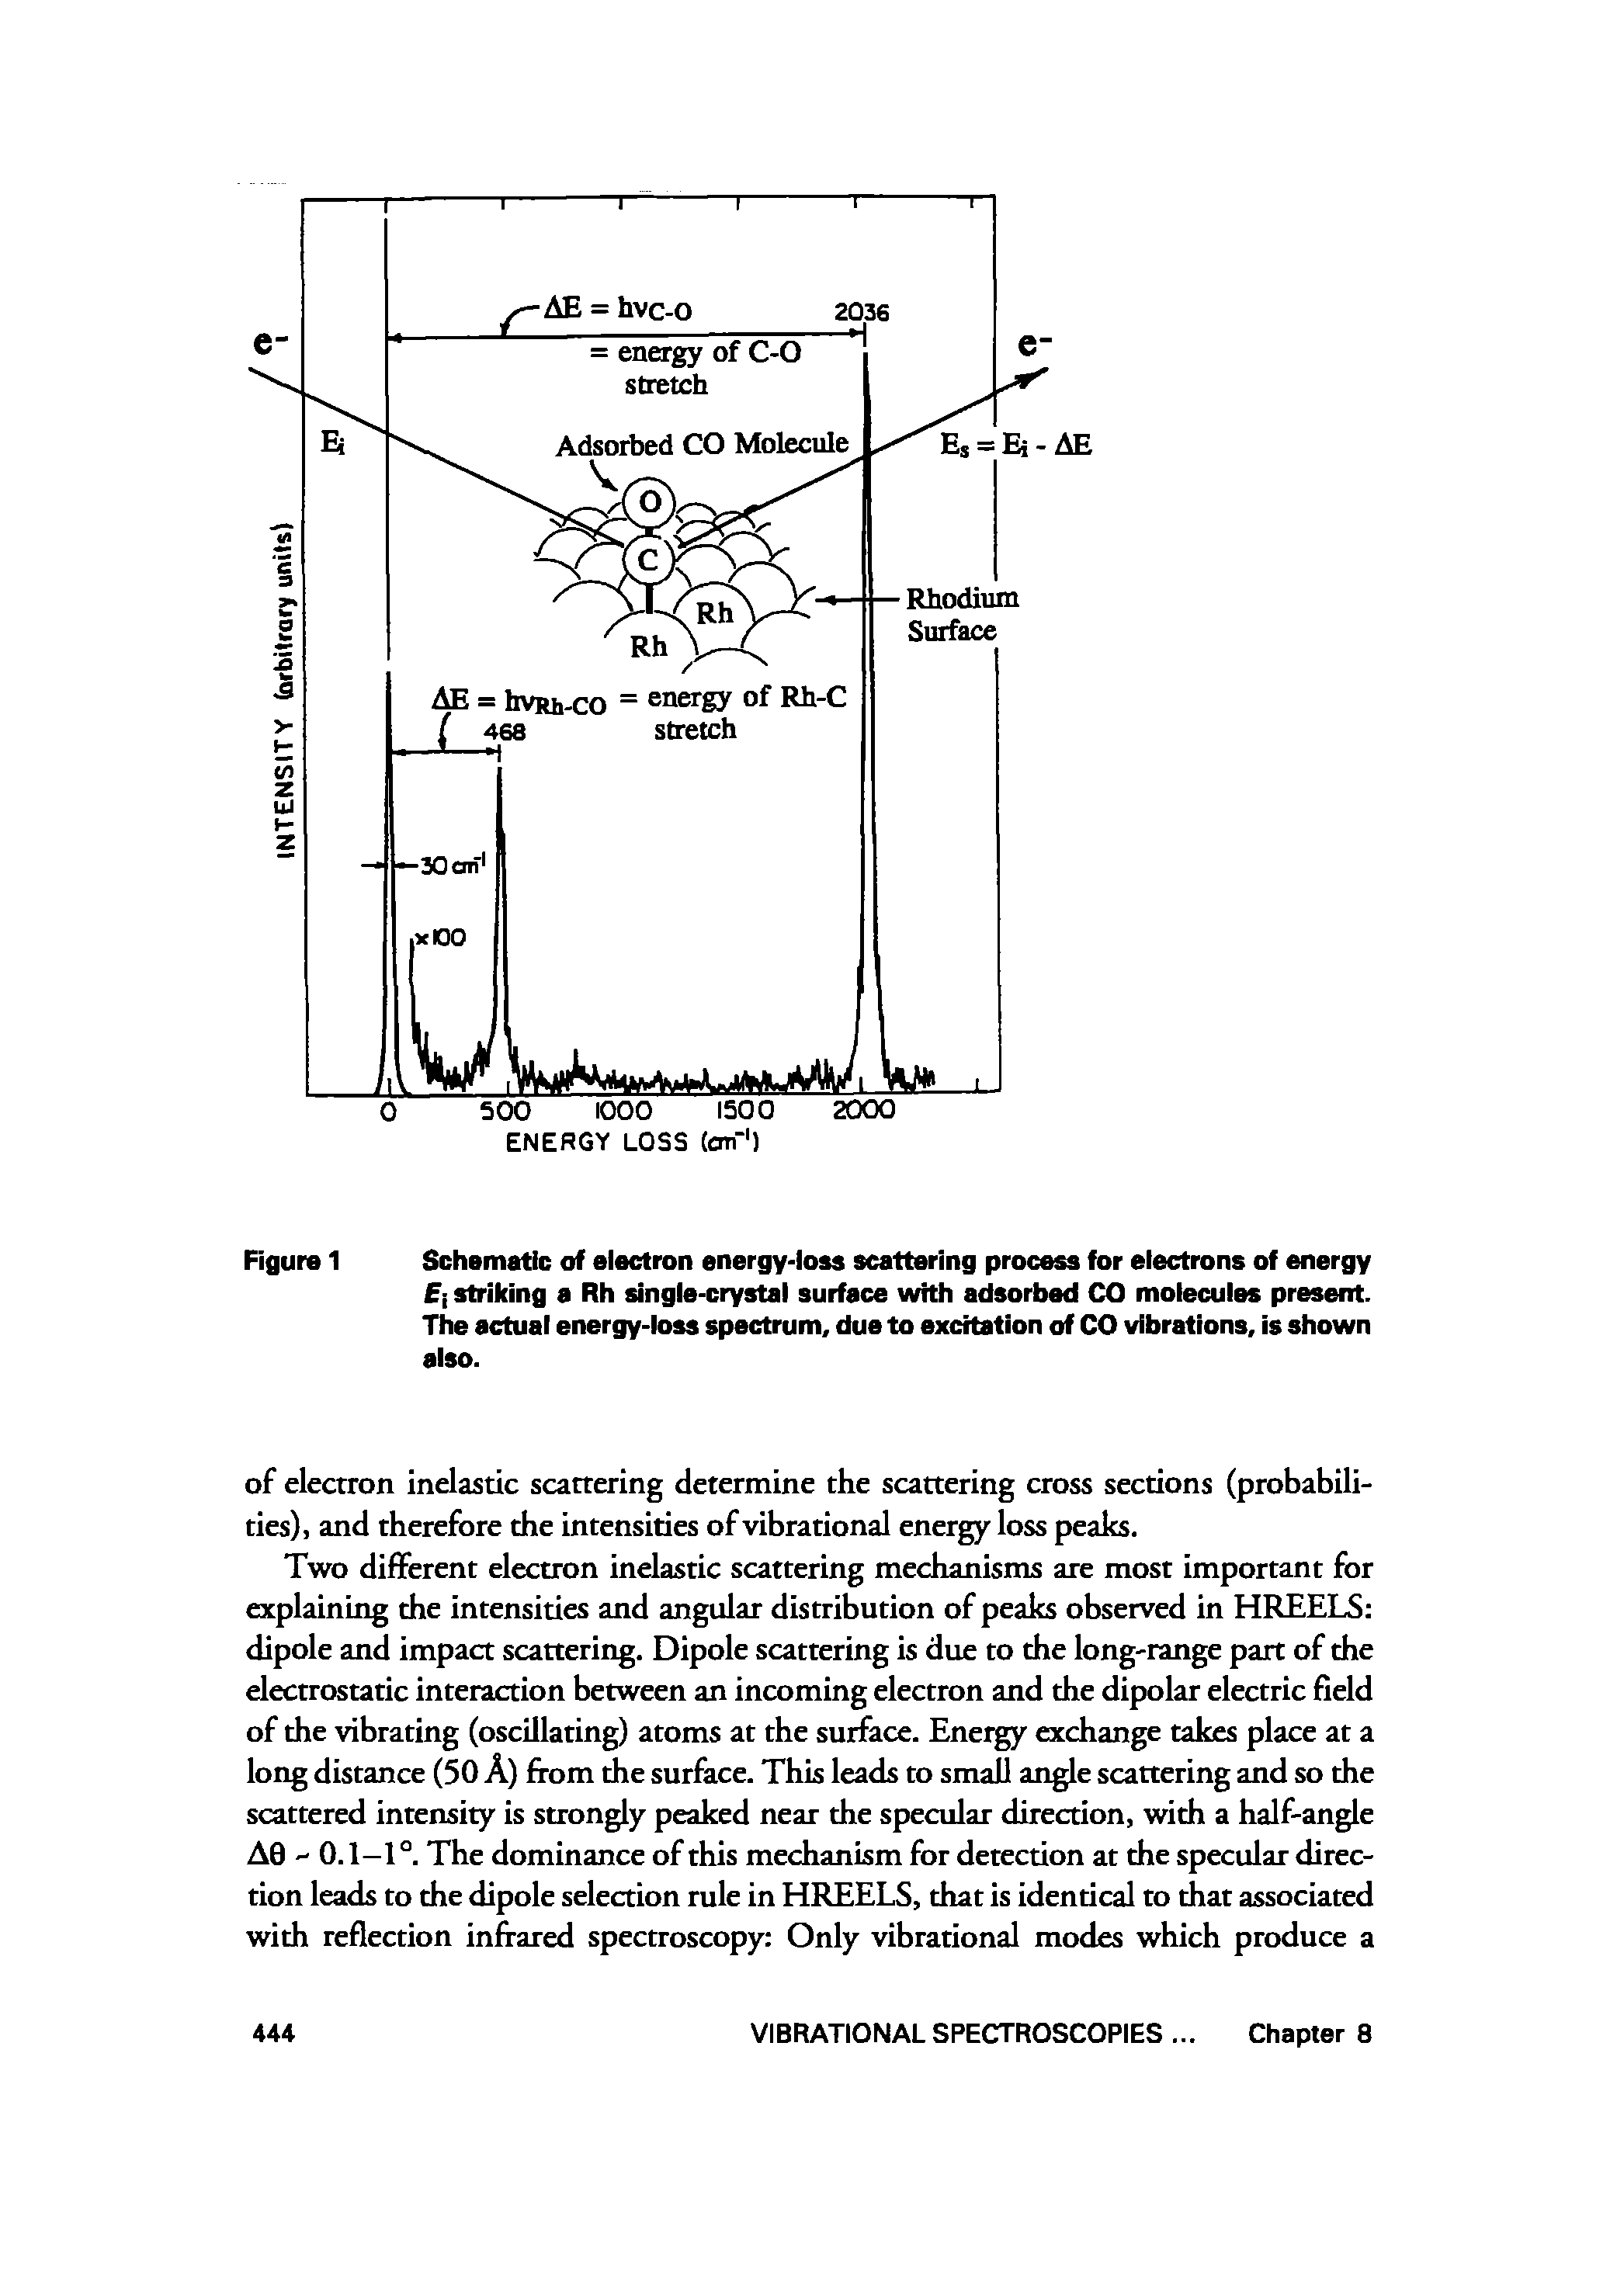 Figure 1 Schematic of eiectron energy-loss scattering process for electrons of energy striking a Rh single-crystal surface with adsorbed CO molecules present. The actual energy-loss spectrum, due to excitation of CO vibrations, is shown also.